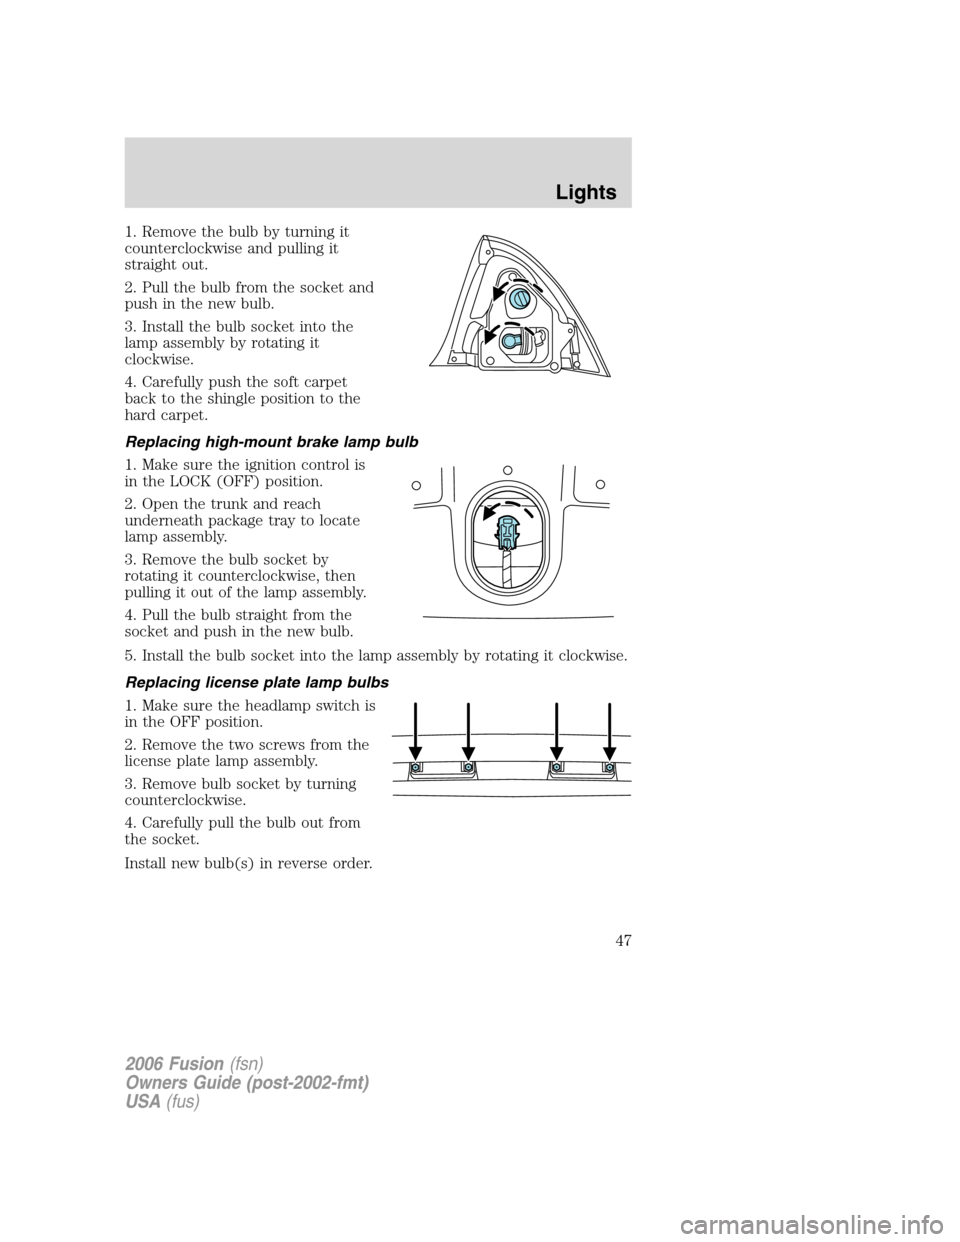 FORD FUSION (AMERICAS) 2006 1.G Owners Manual 1. Remove the bulb by turning it
counterclockwise and pulling it
straight out.
2. Pull the bulb from the socket and
push in the new bulb.
3. Install the bulb socket into the
lamp assembly by rotating 